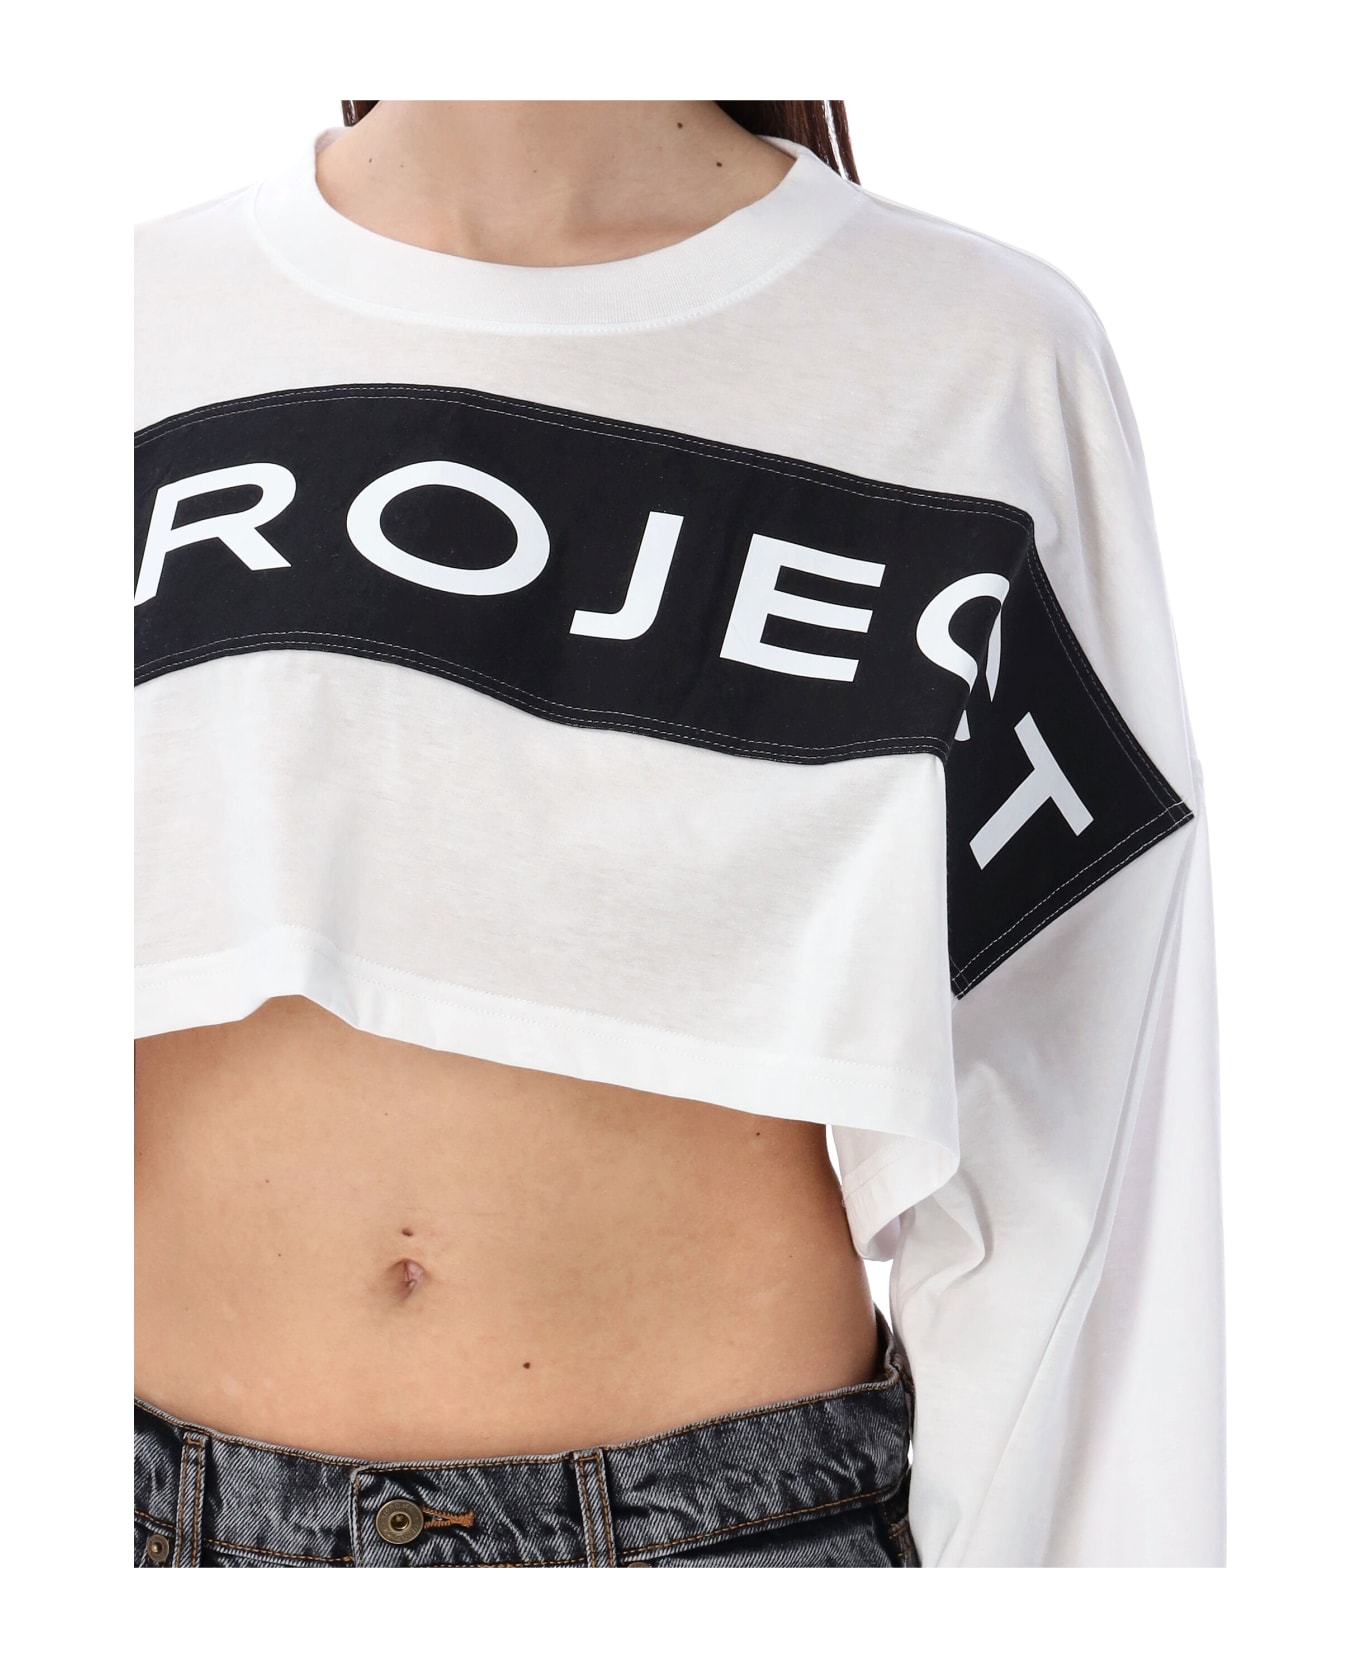 Y/Project Logo Band Crop Top - OPTIC WHITE トップス